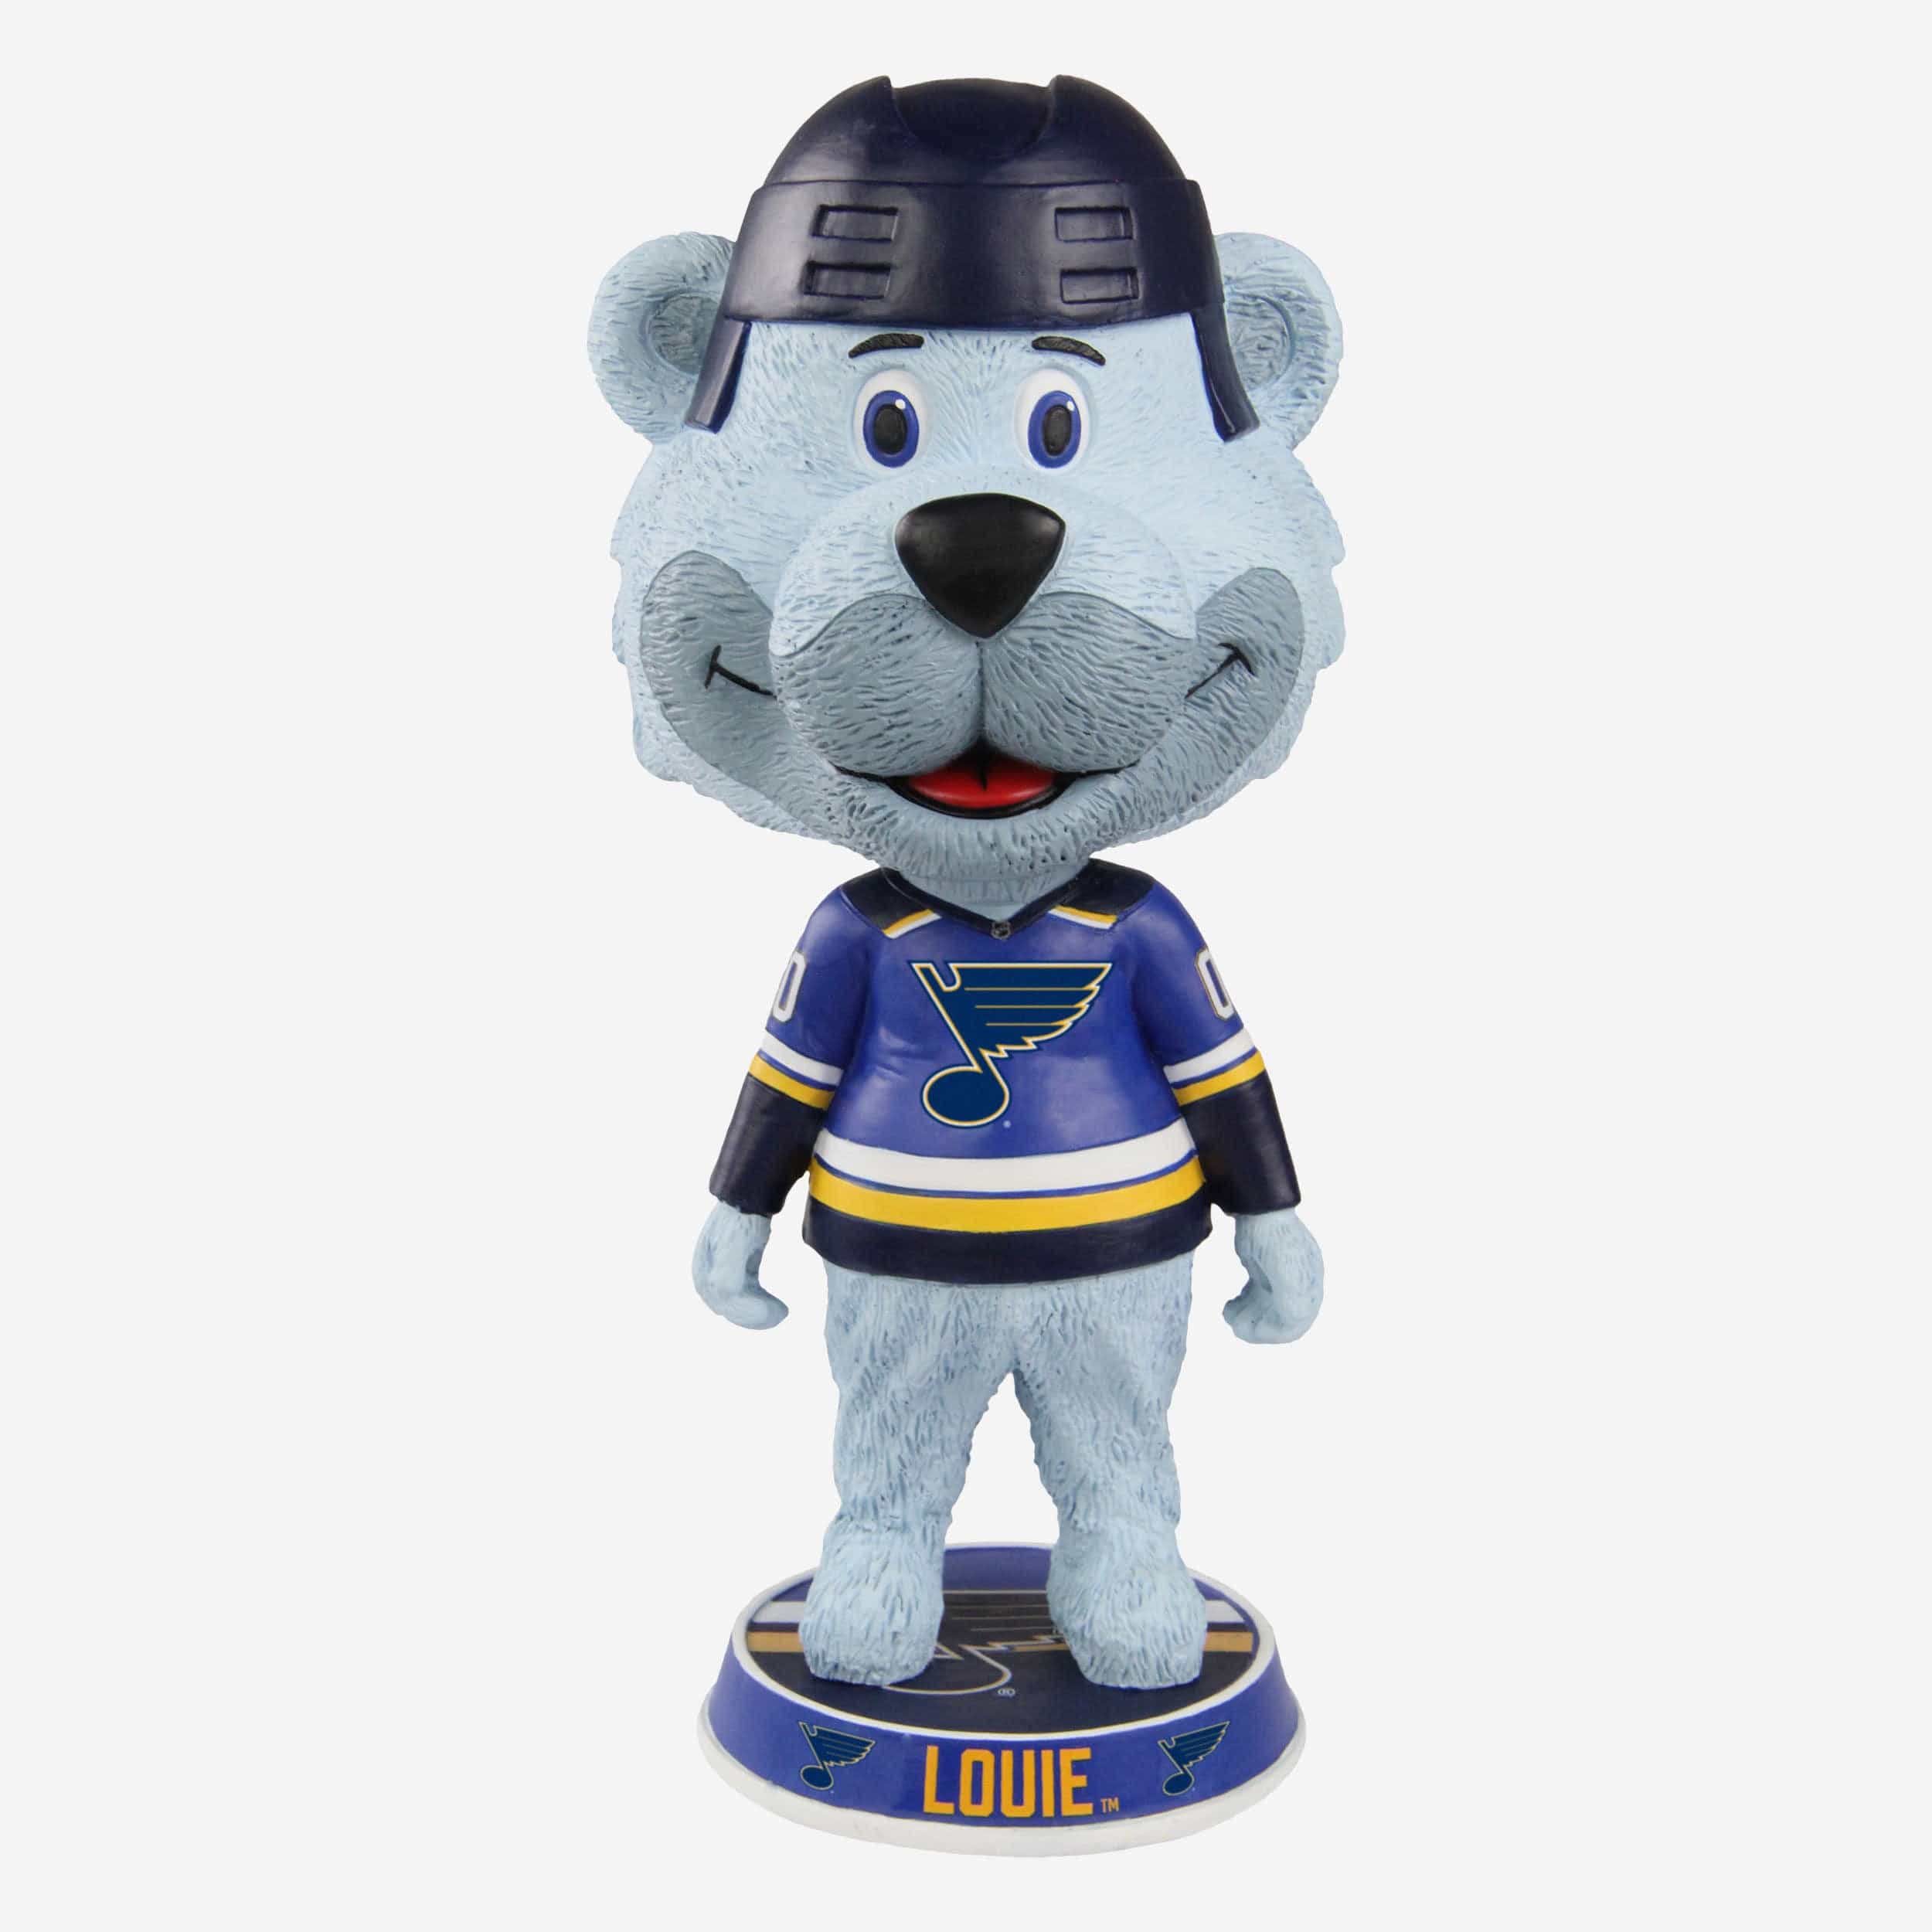 Louie St Louis Blues Mascot Bighead Bobblehead Officially Licensed by NHL